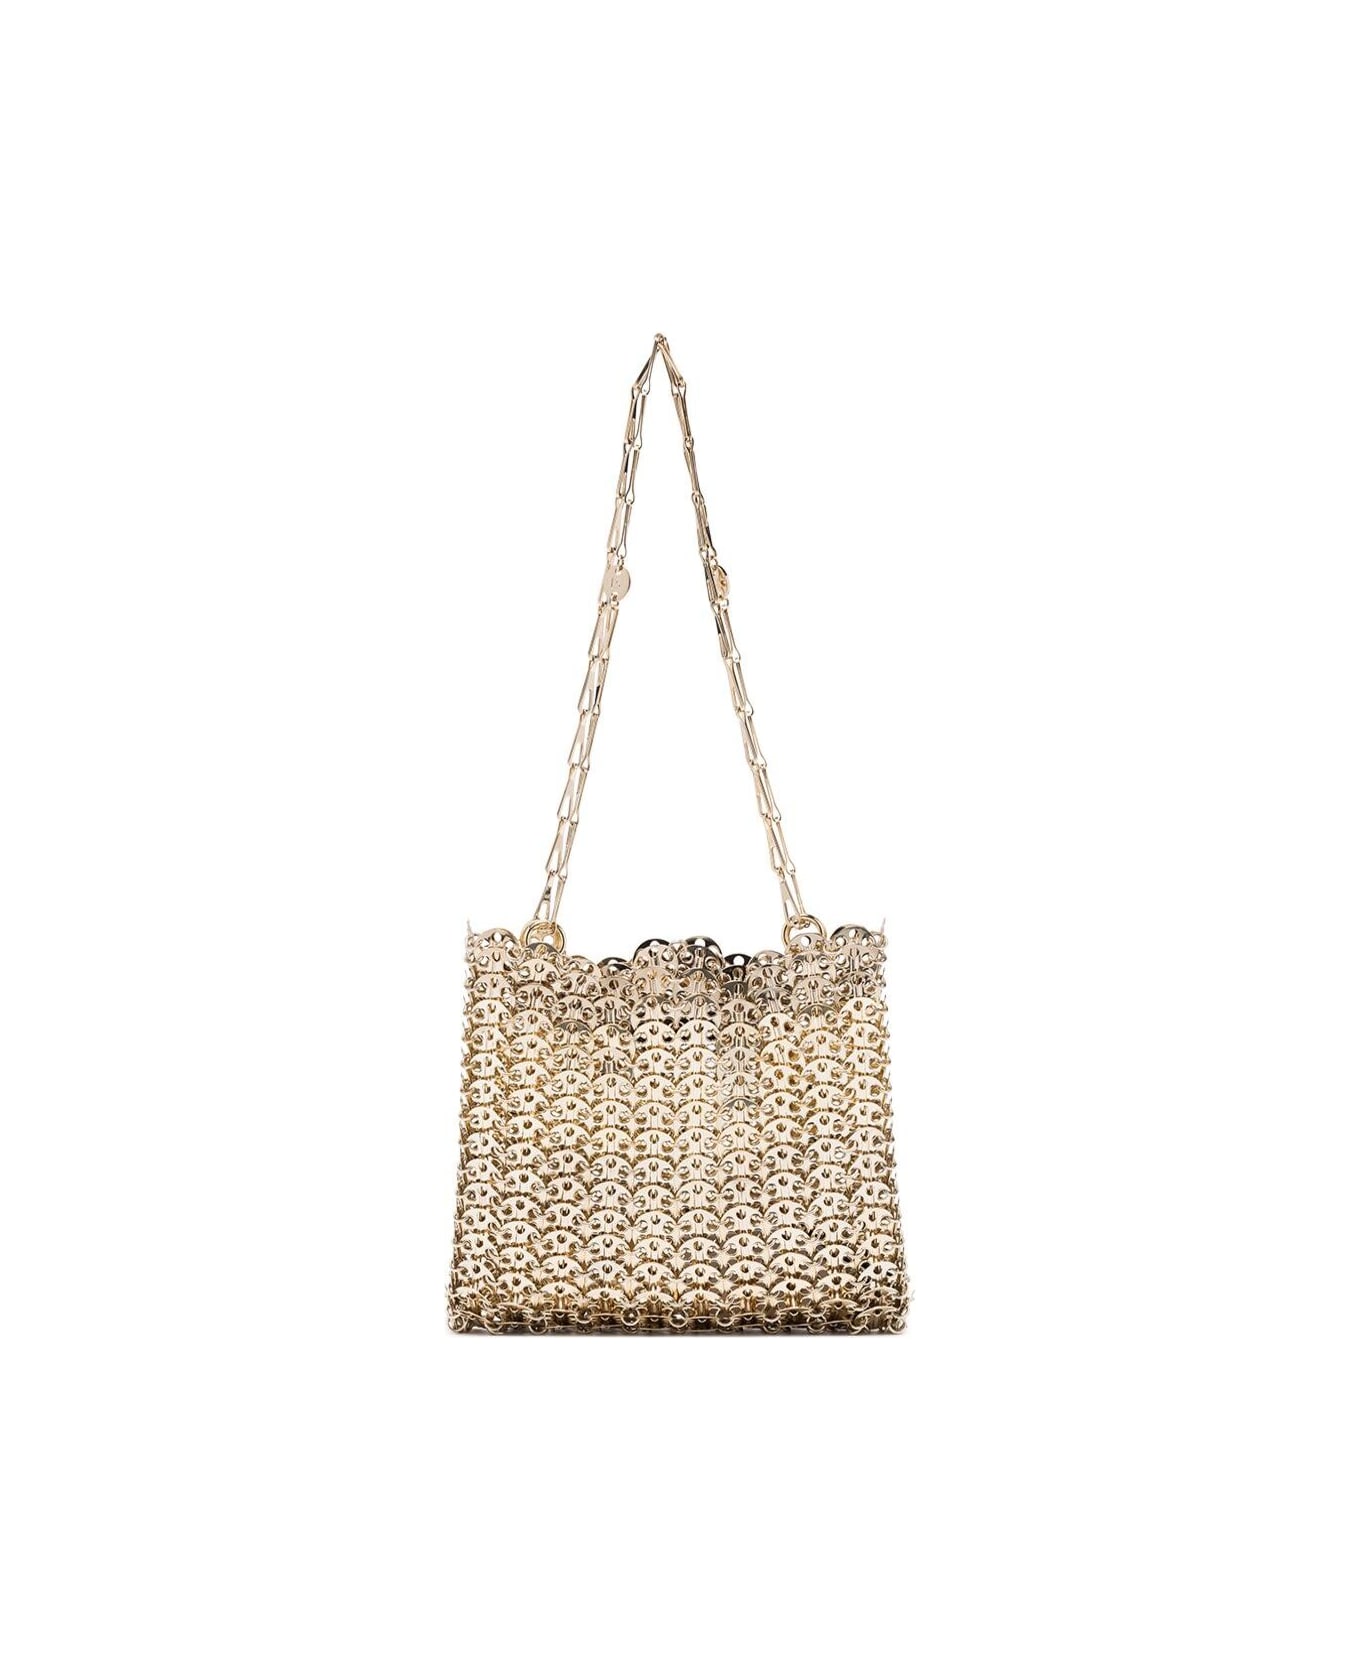 Paco Rabanne '1969' Gold-colored Shoulder Bag With Brass Discs Woman - LIGHT GOLD